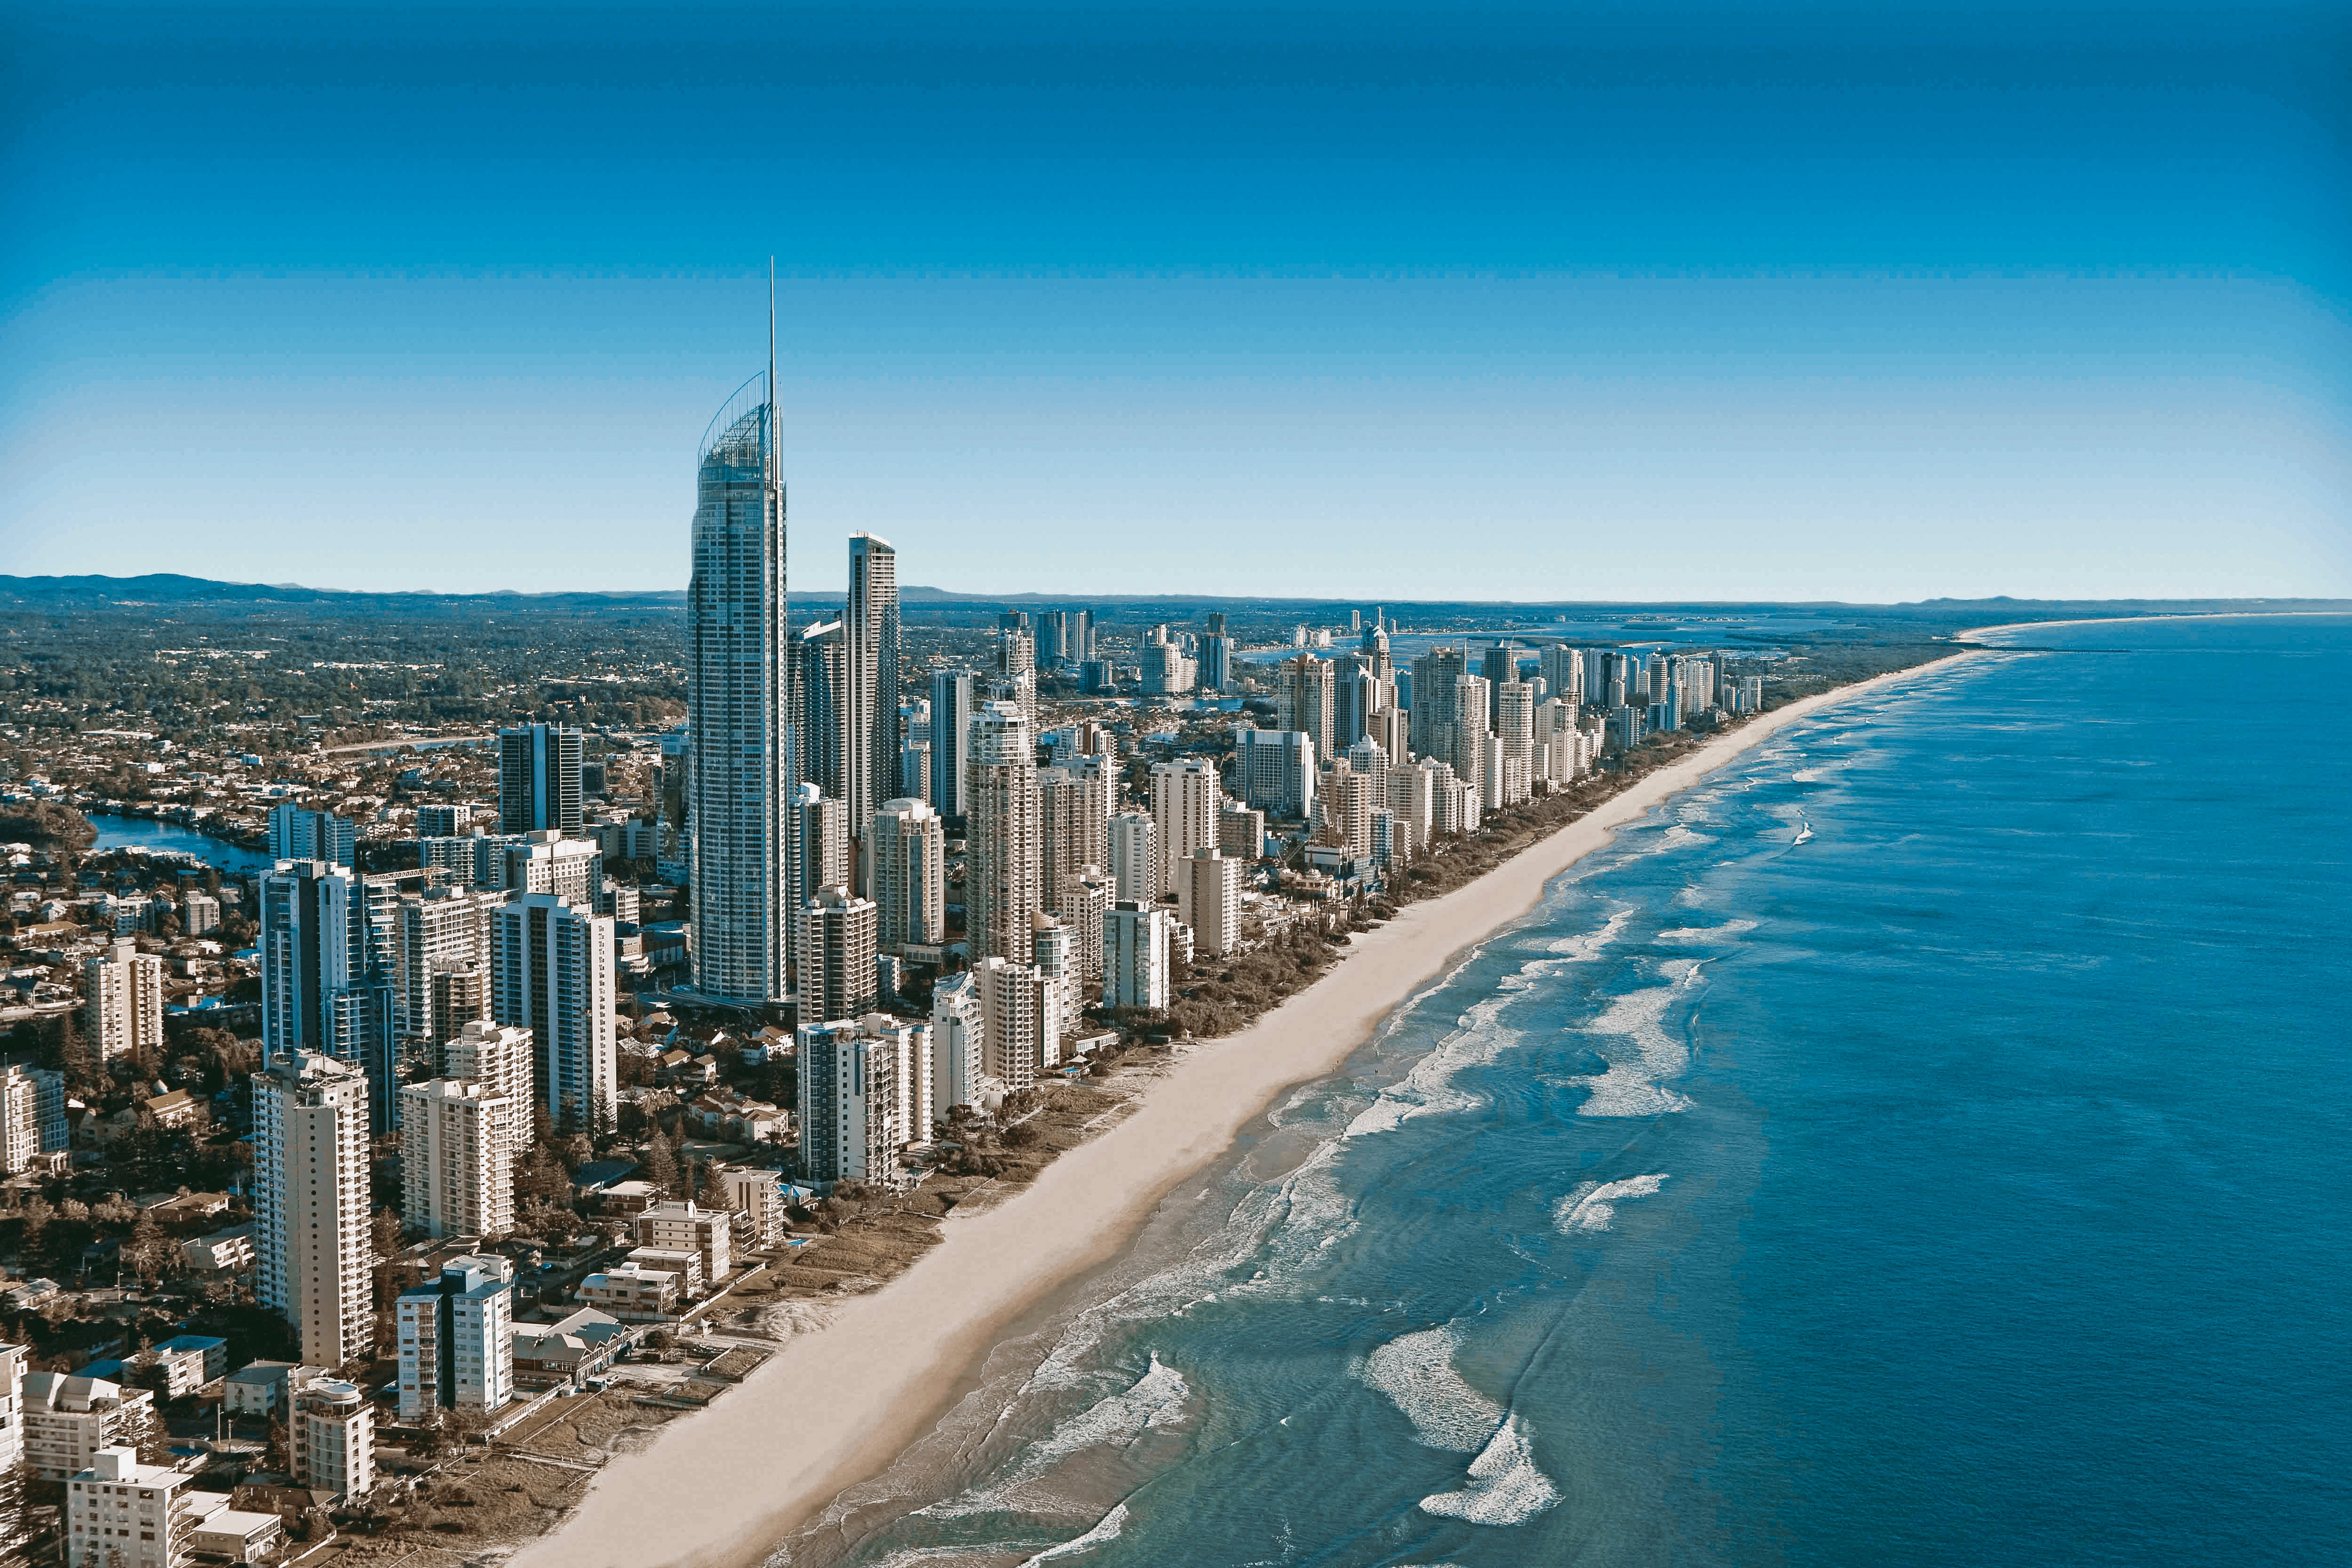 A long sandy coast with high-rises and skyscrapers HD Wallpapers